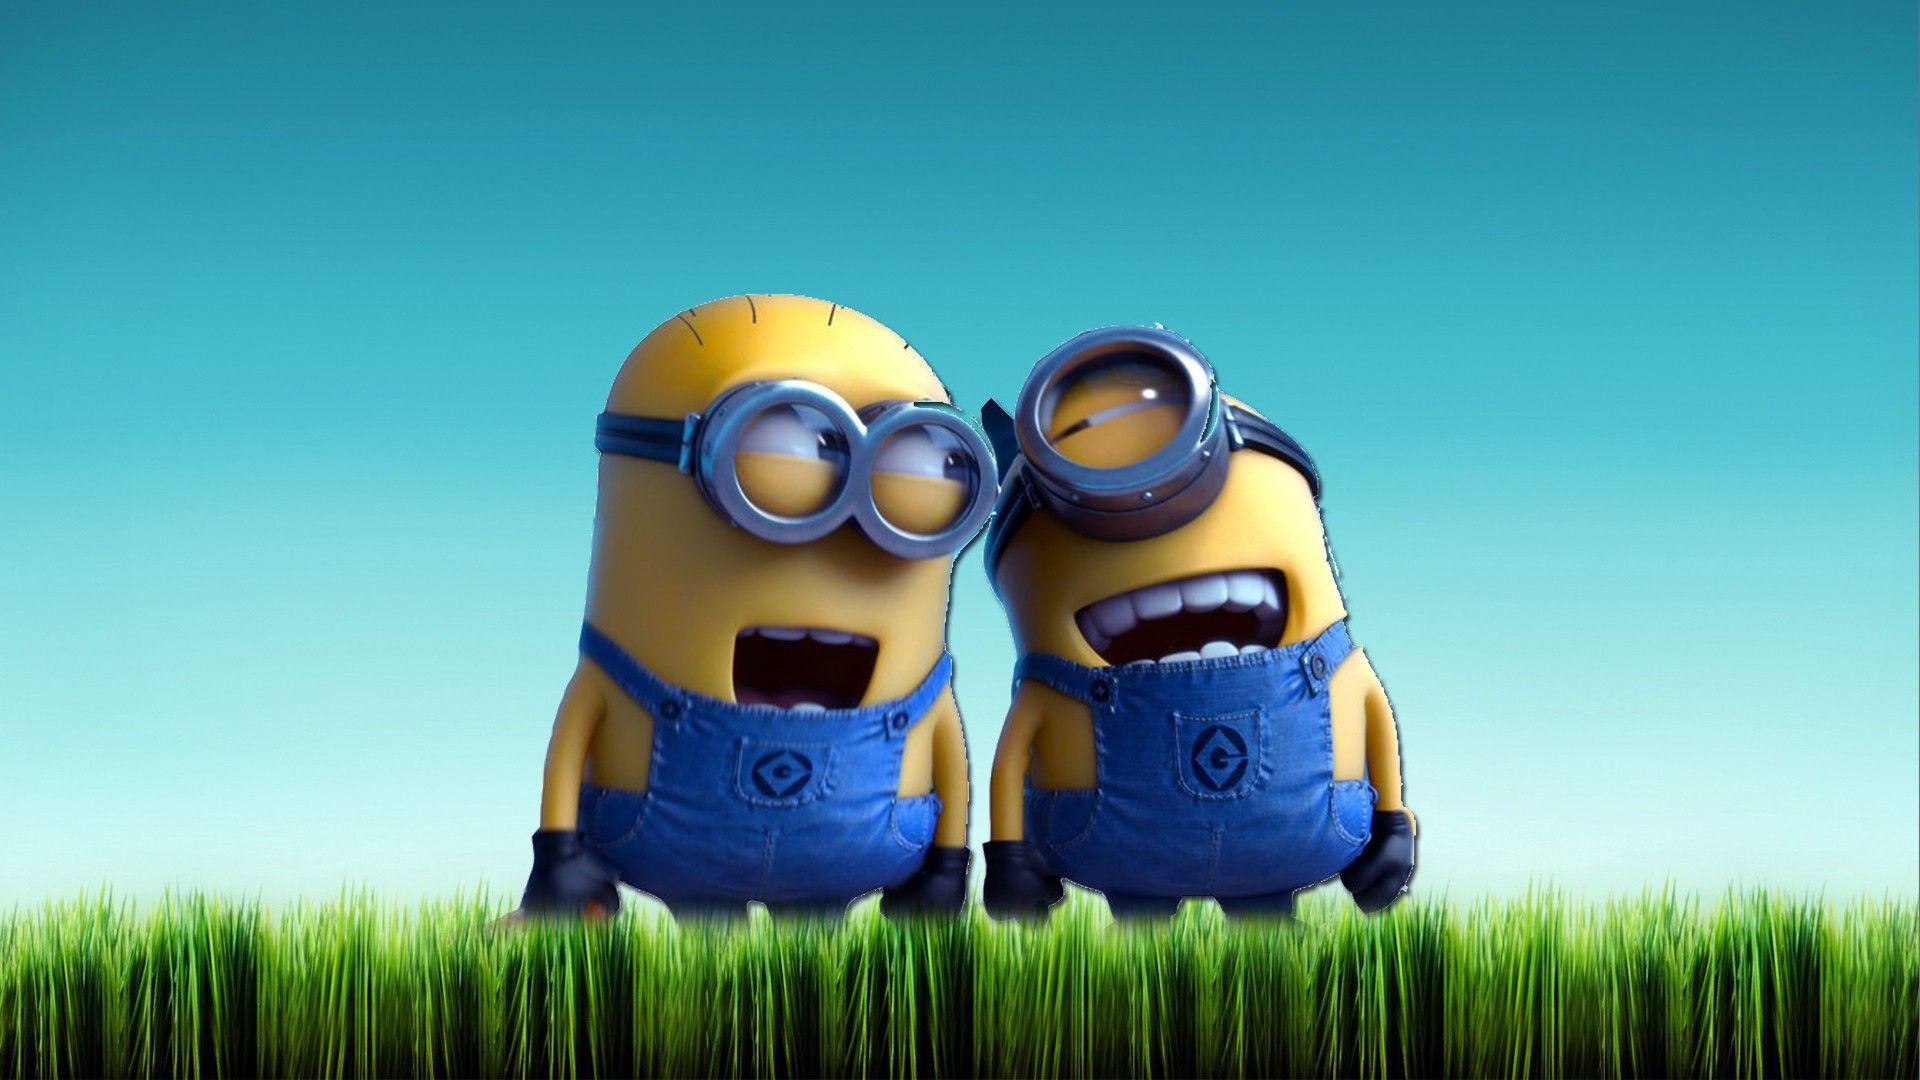 Wallpapers Minions HD - Wallpaper Cave